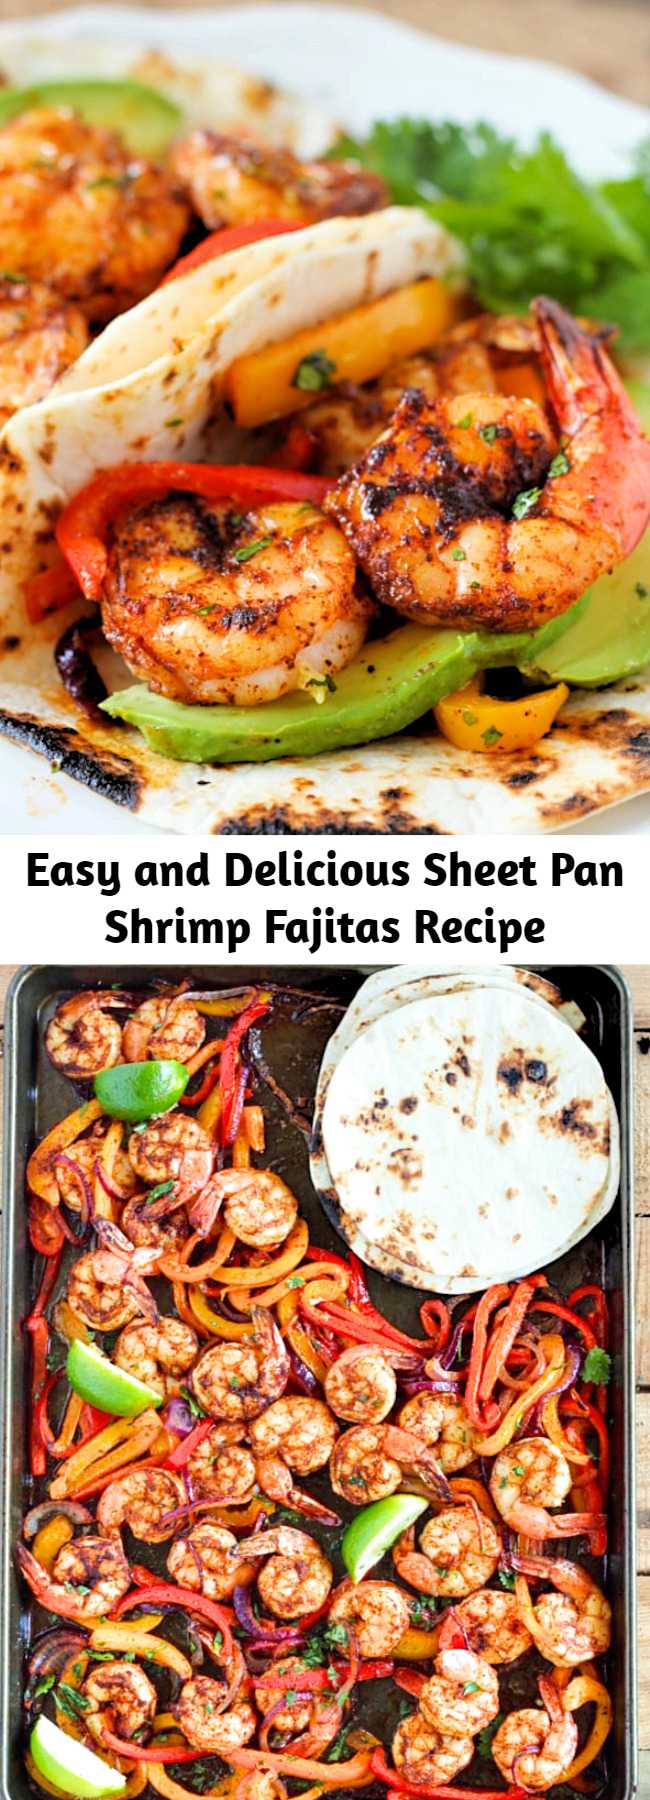 Easy and Delicious Sheet Pan Shrimp Fajitas Recipe - This shrimp fajita recipe is seriously so easy and delicious! All you have to do is scoop the juicy shrimp, tender bell pepper and onions into a soft warm tortilla for a super fast and easy weeknight dinner!